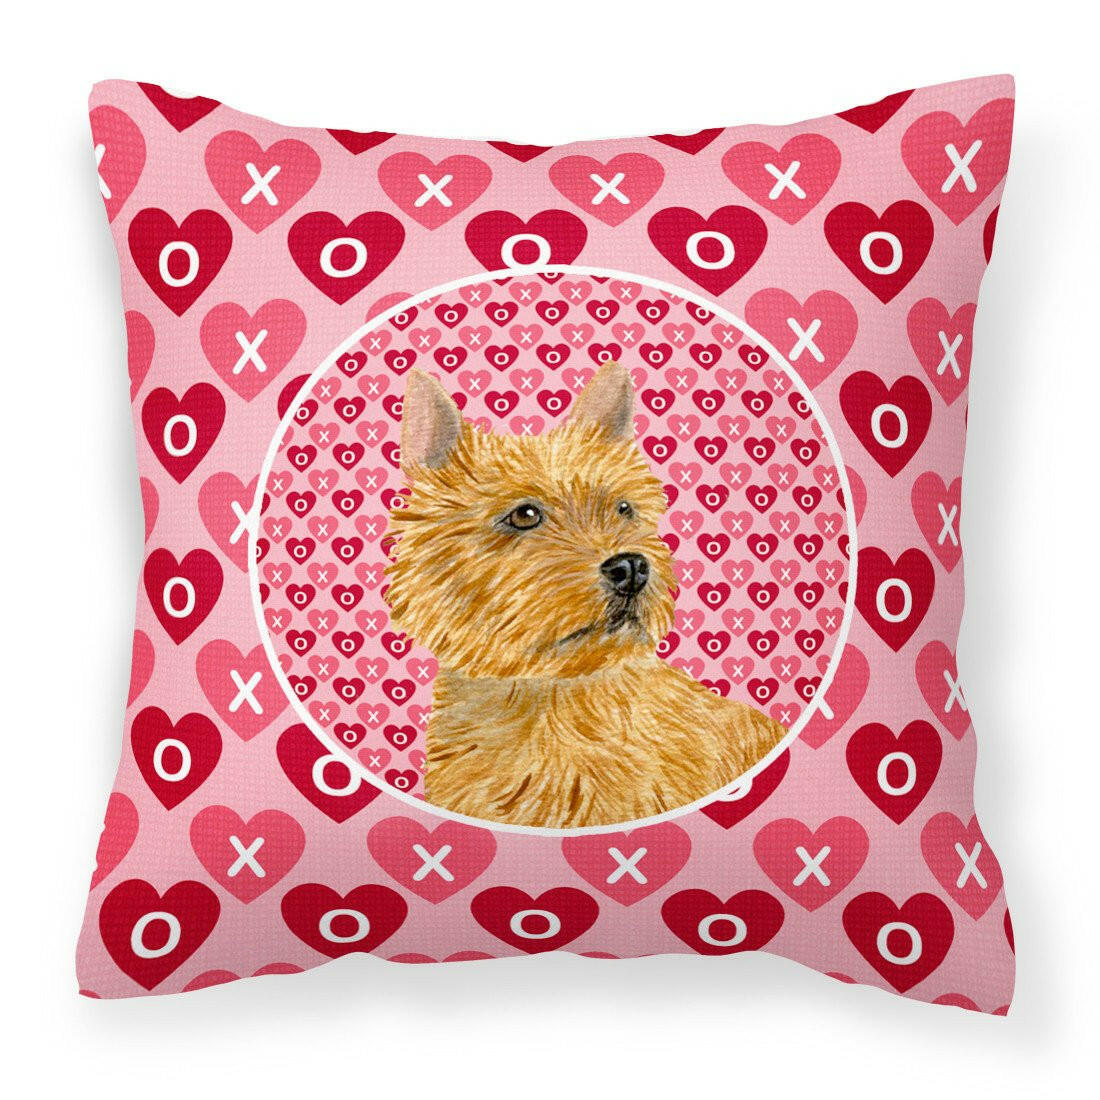 Norwich Terrier Hearts Love and Valentine's Day Portrait Fabric Decorative Pillow SS4499PW1414 by Caroline's Treasures